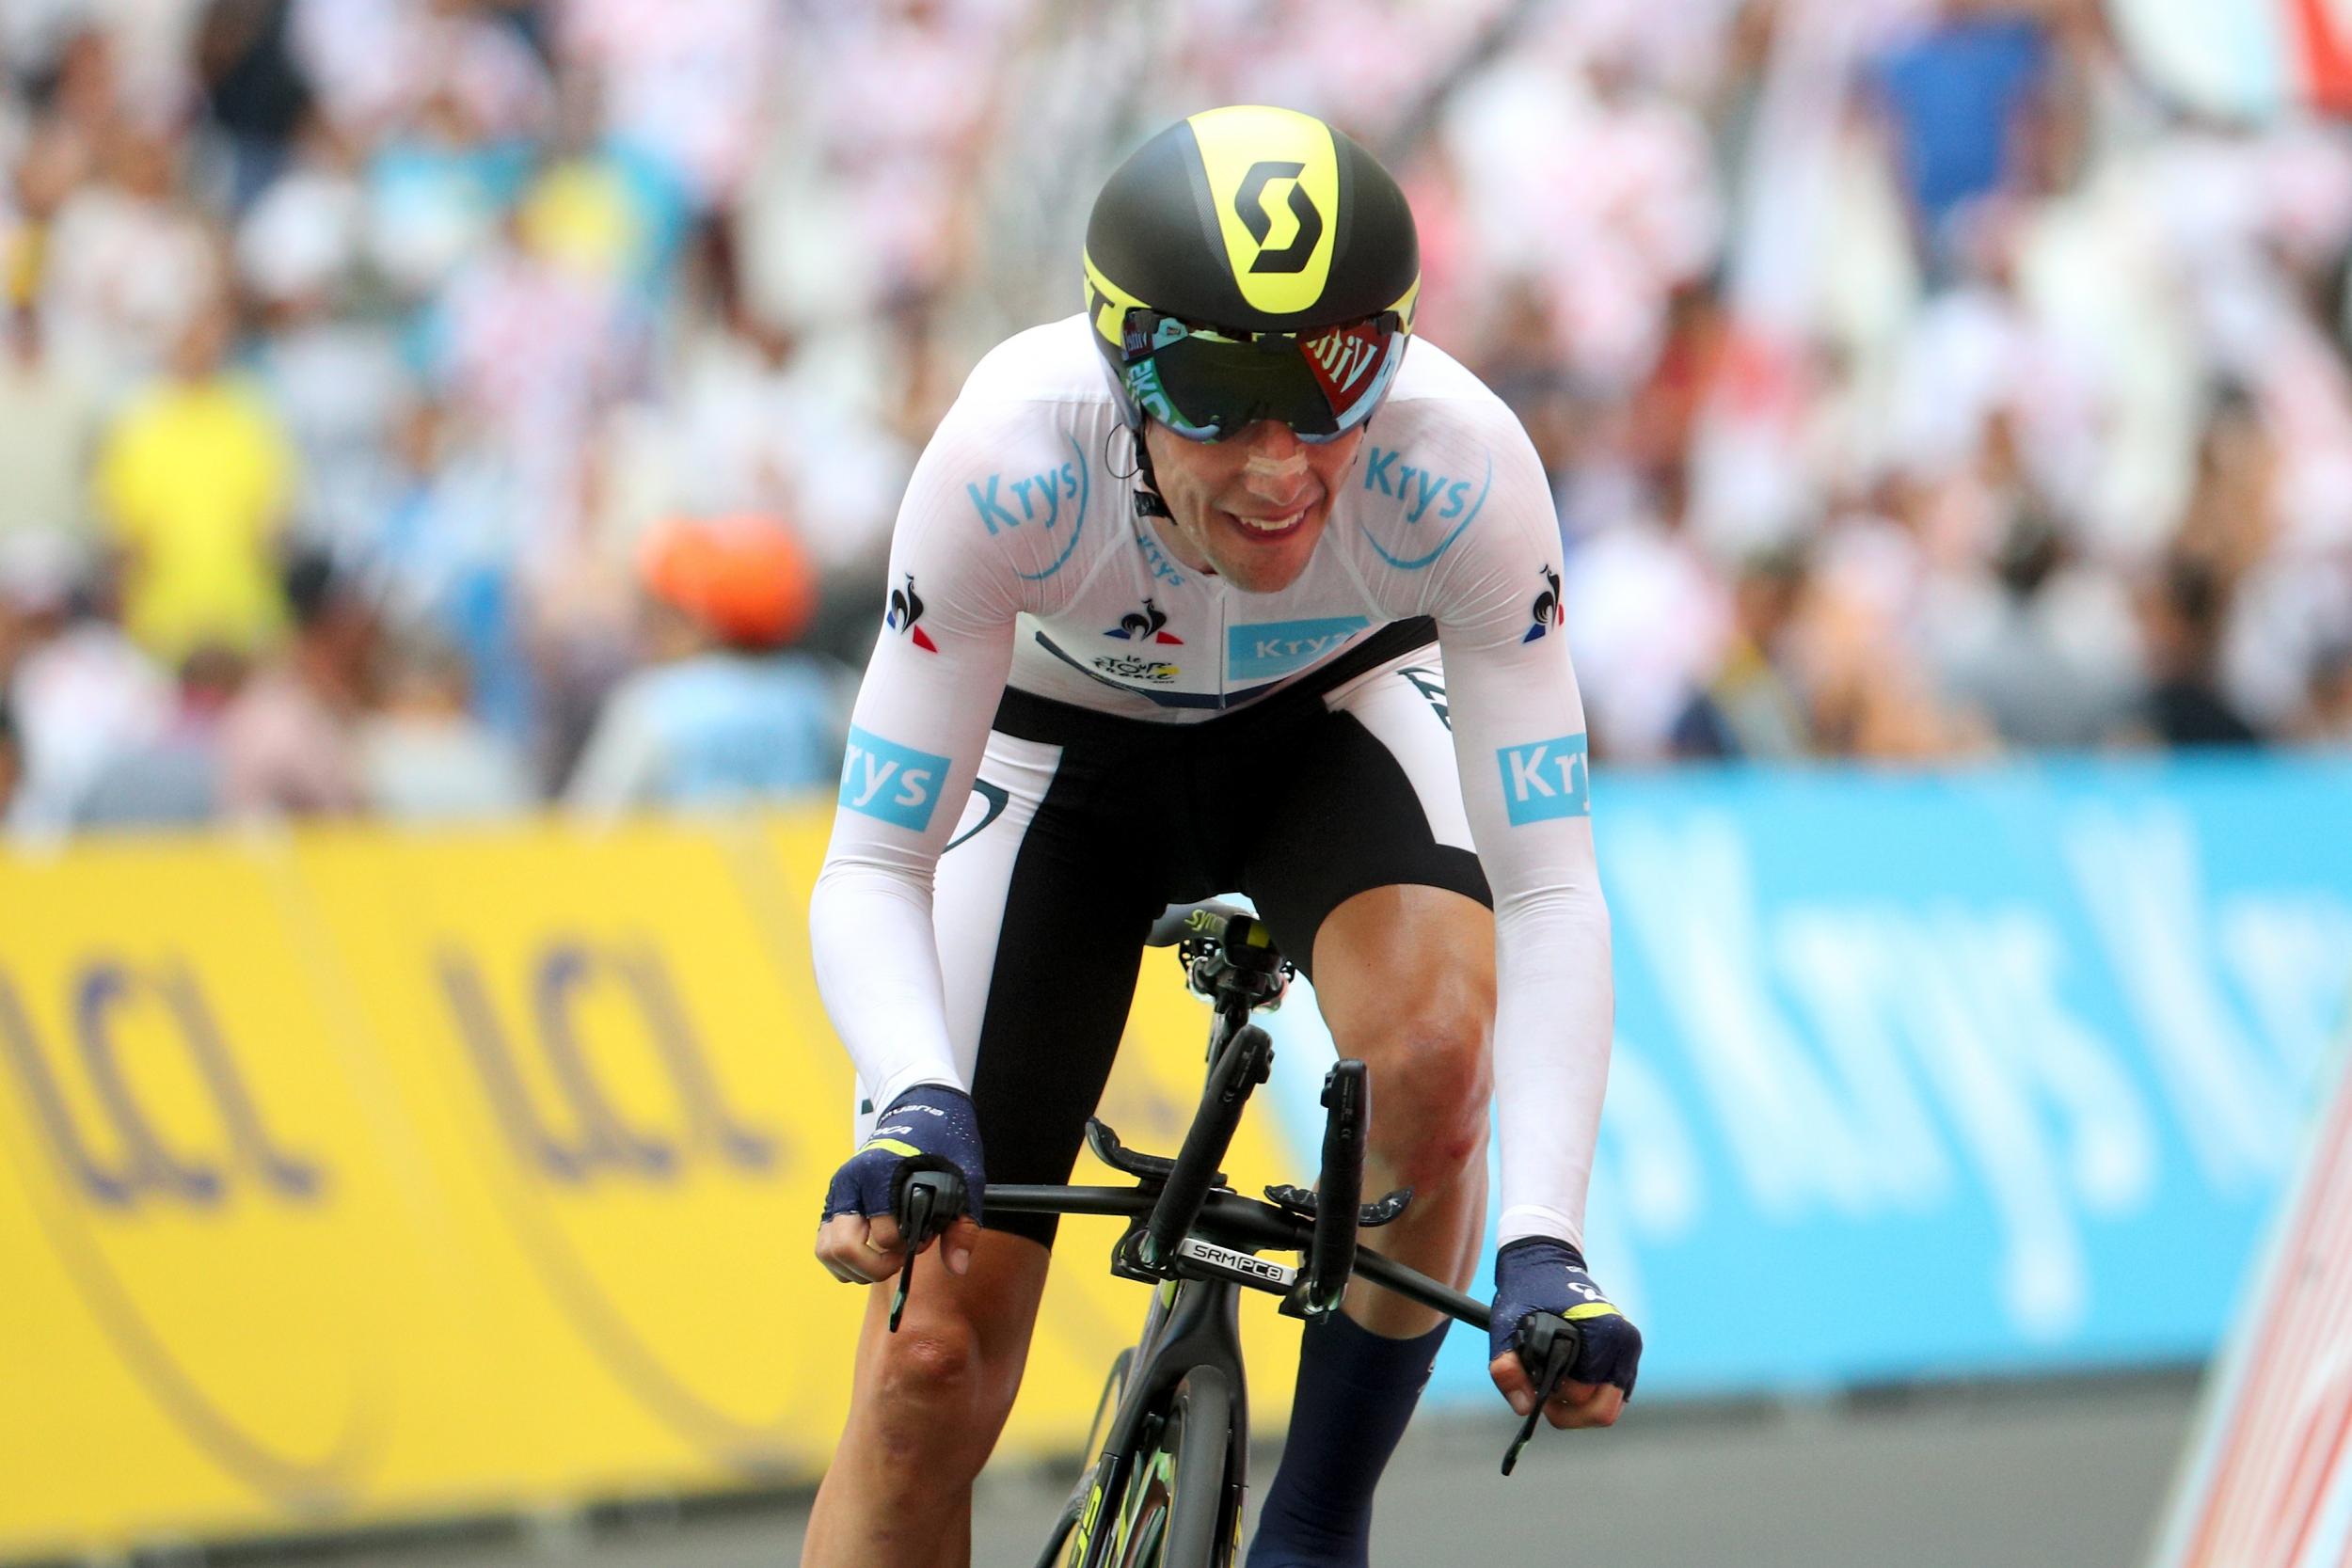 Simon Yates: ‘Every day is extremely exhausting – physically and mentally’